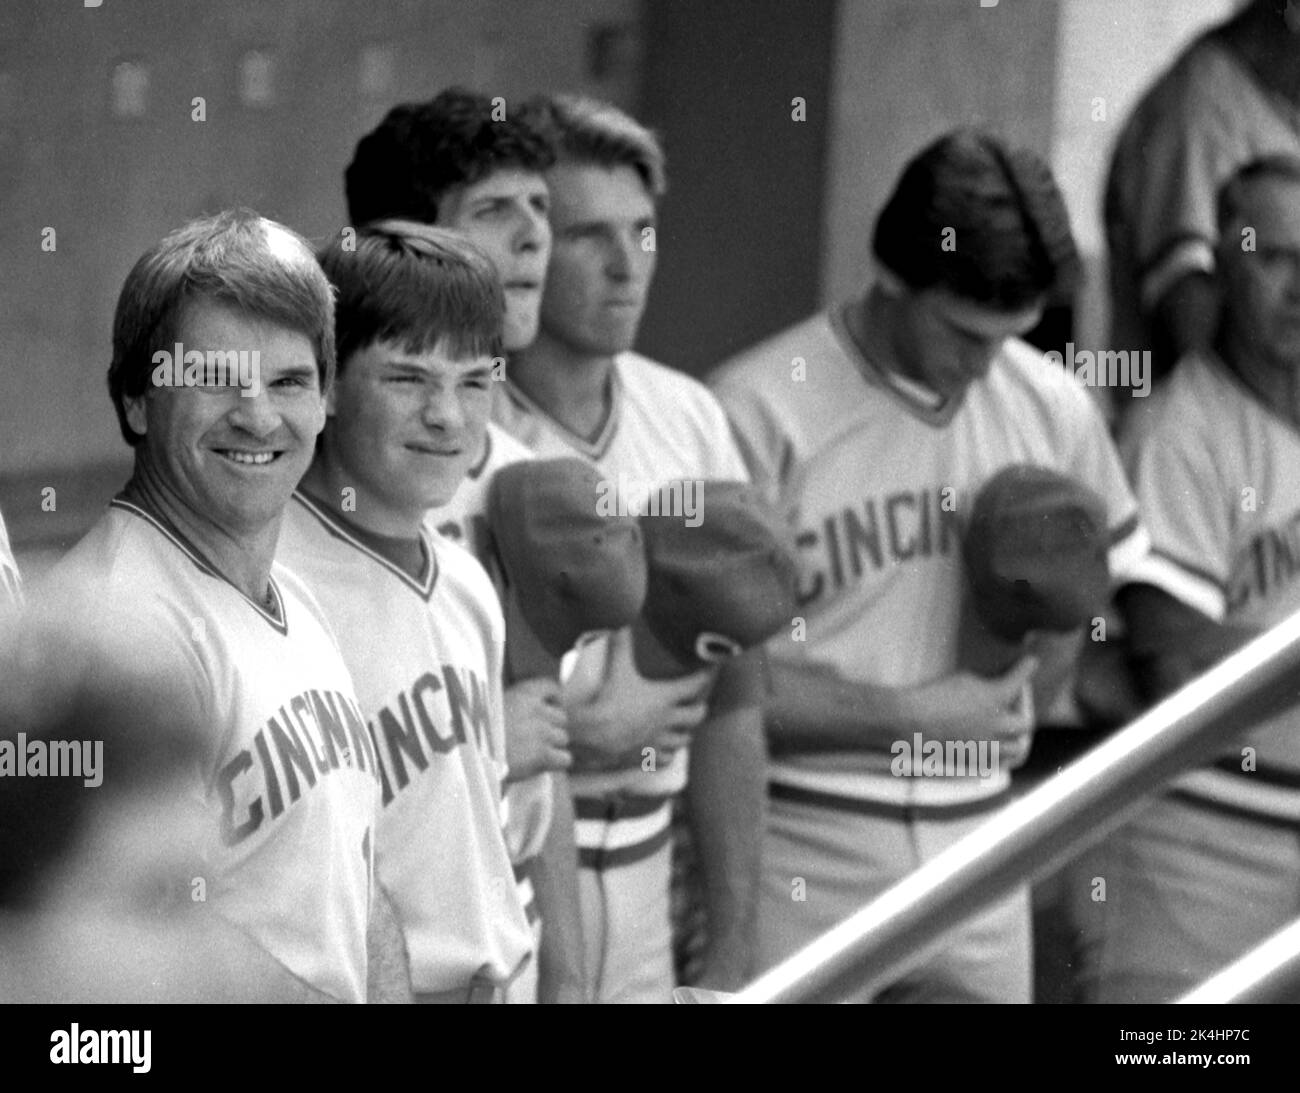 Pete Rose manager / player of the Cincinnati Reds stands next to his son, Pete Rose, Jr. during the national anthem at Wrigley Field,  ca. 1985 Stock Photo